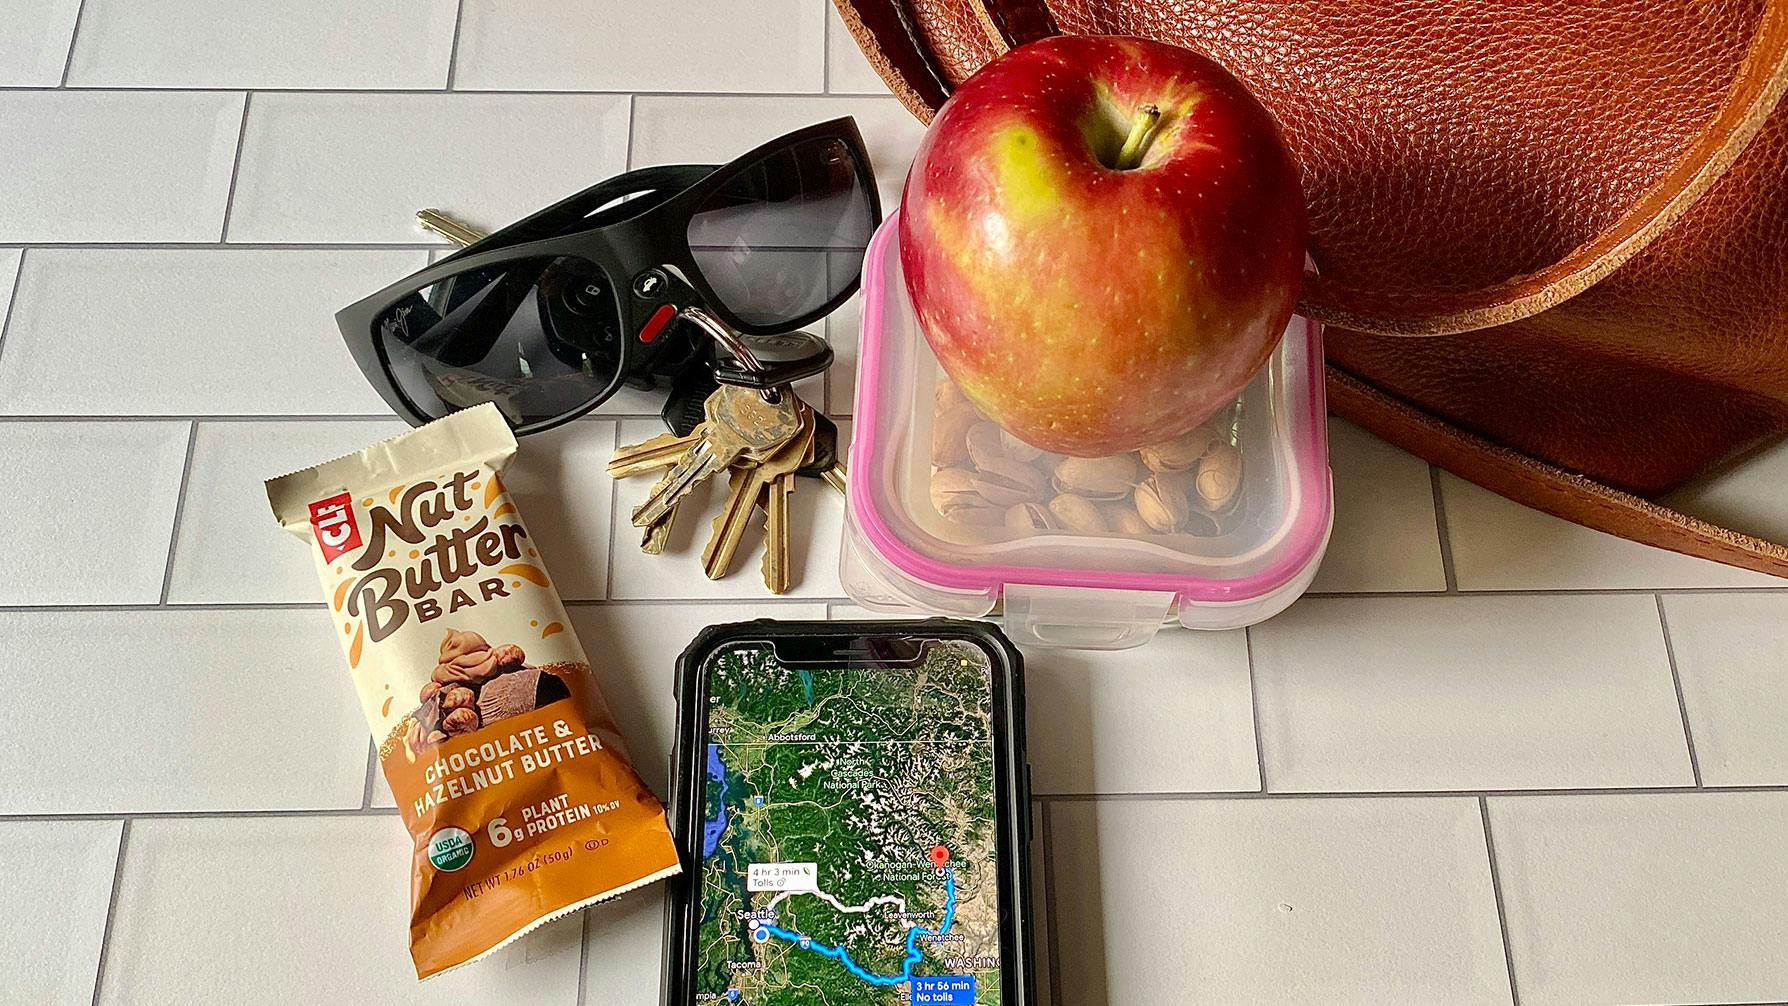 CLIF Nut Butter Bar and road trip items